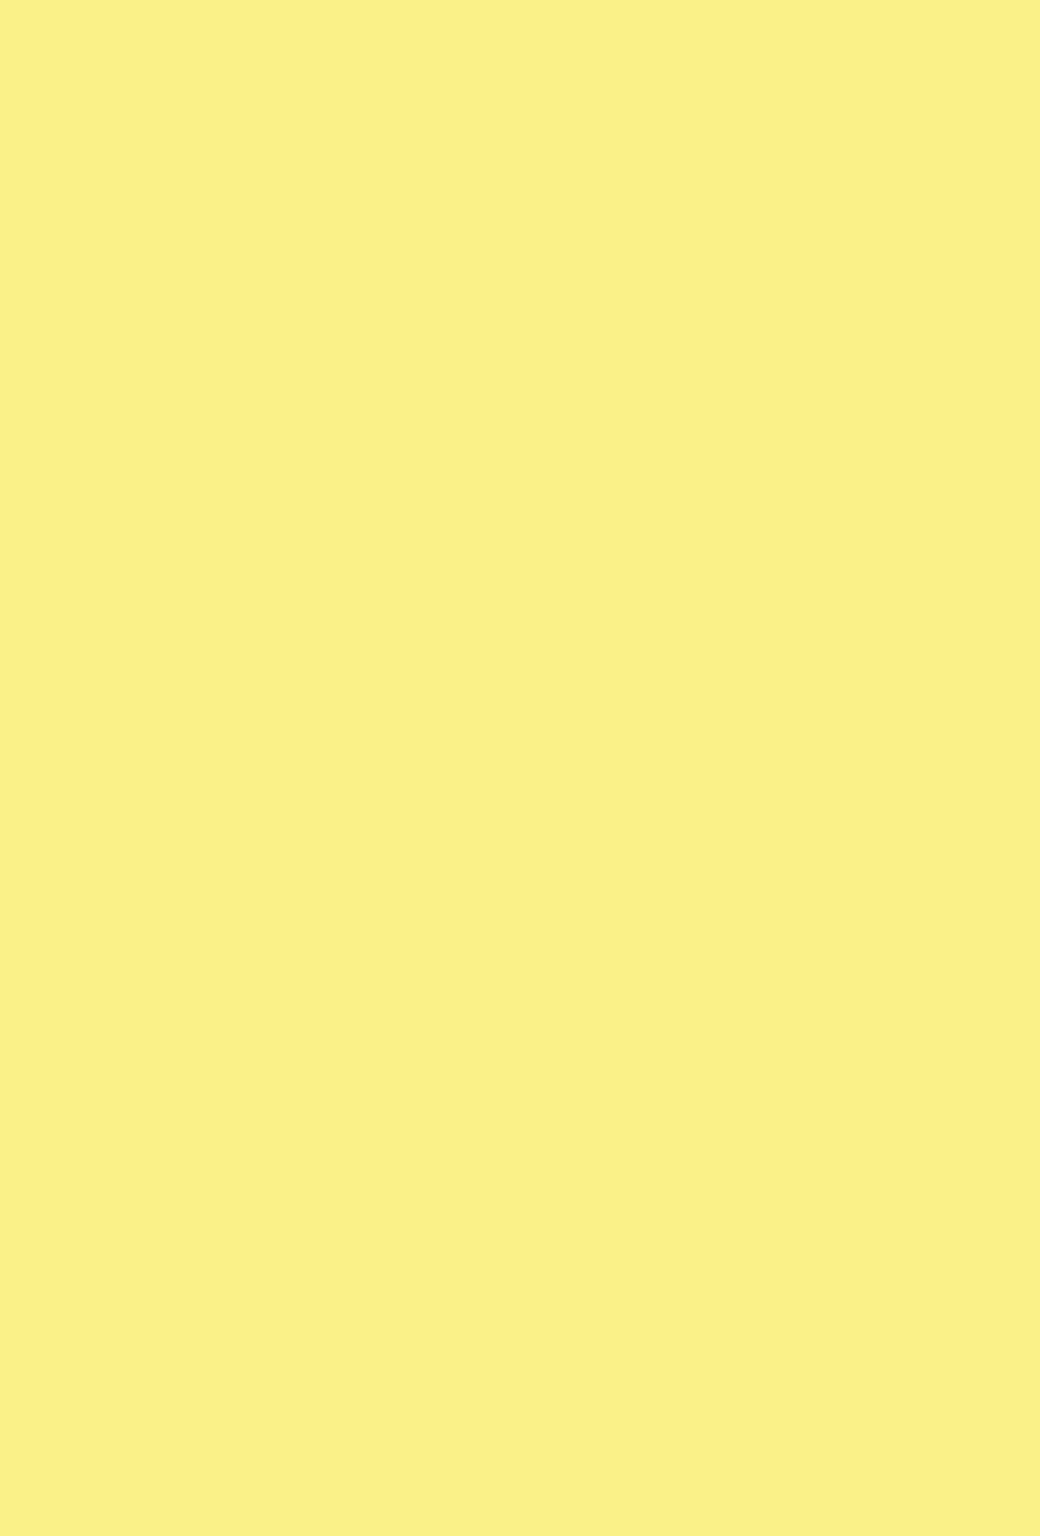 iPhone 5c Yellow By Kyroapps Customization Wallpaper Ipod Touch